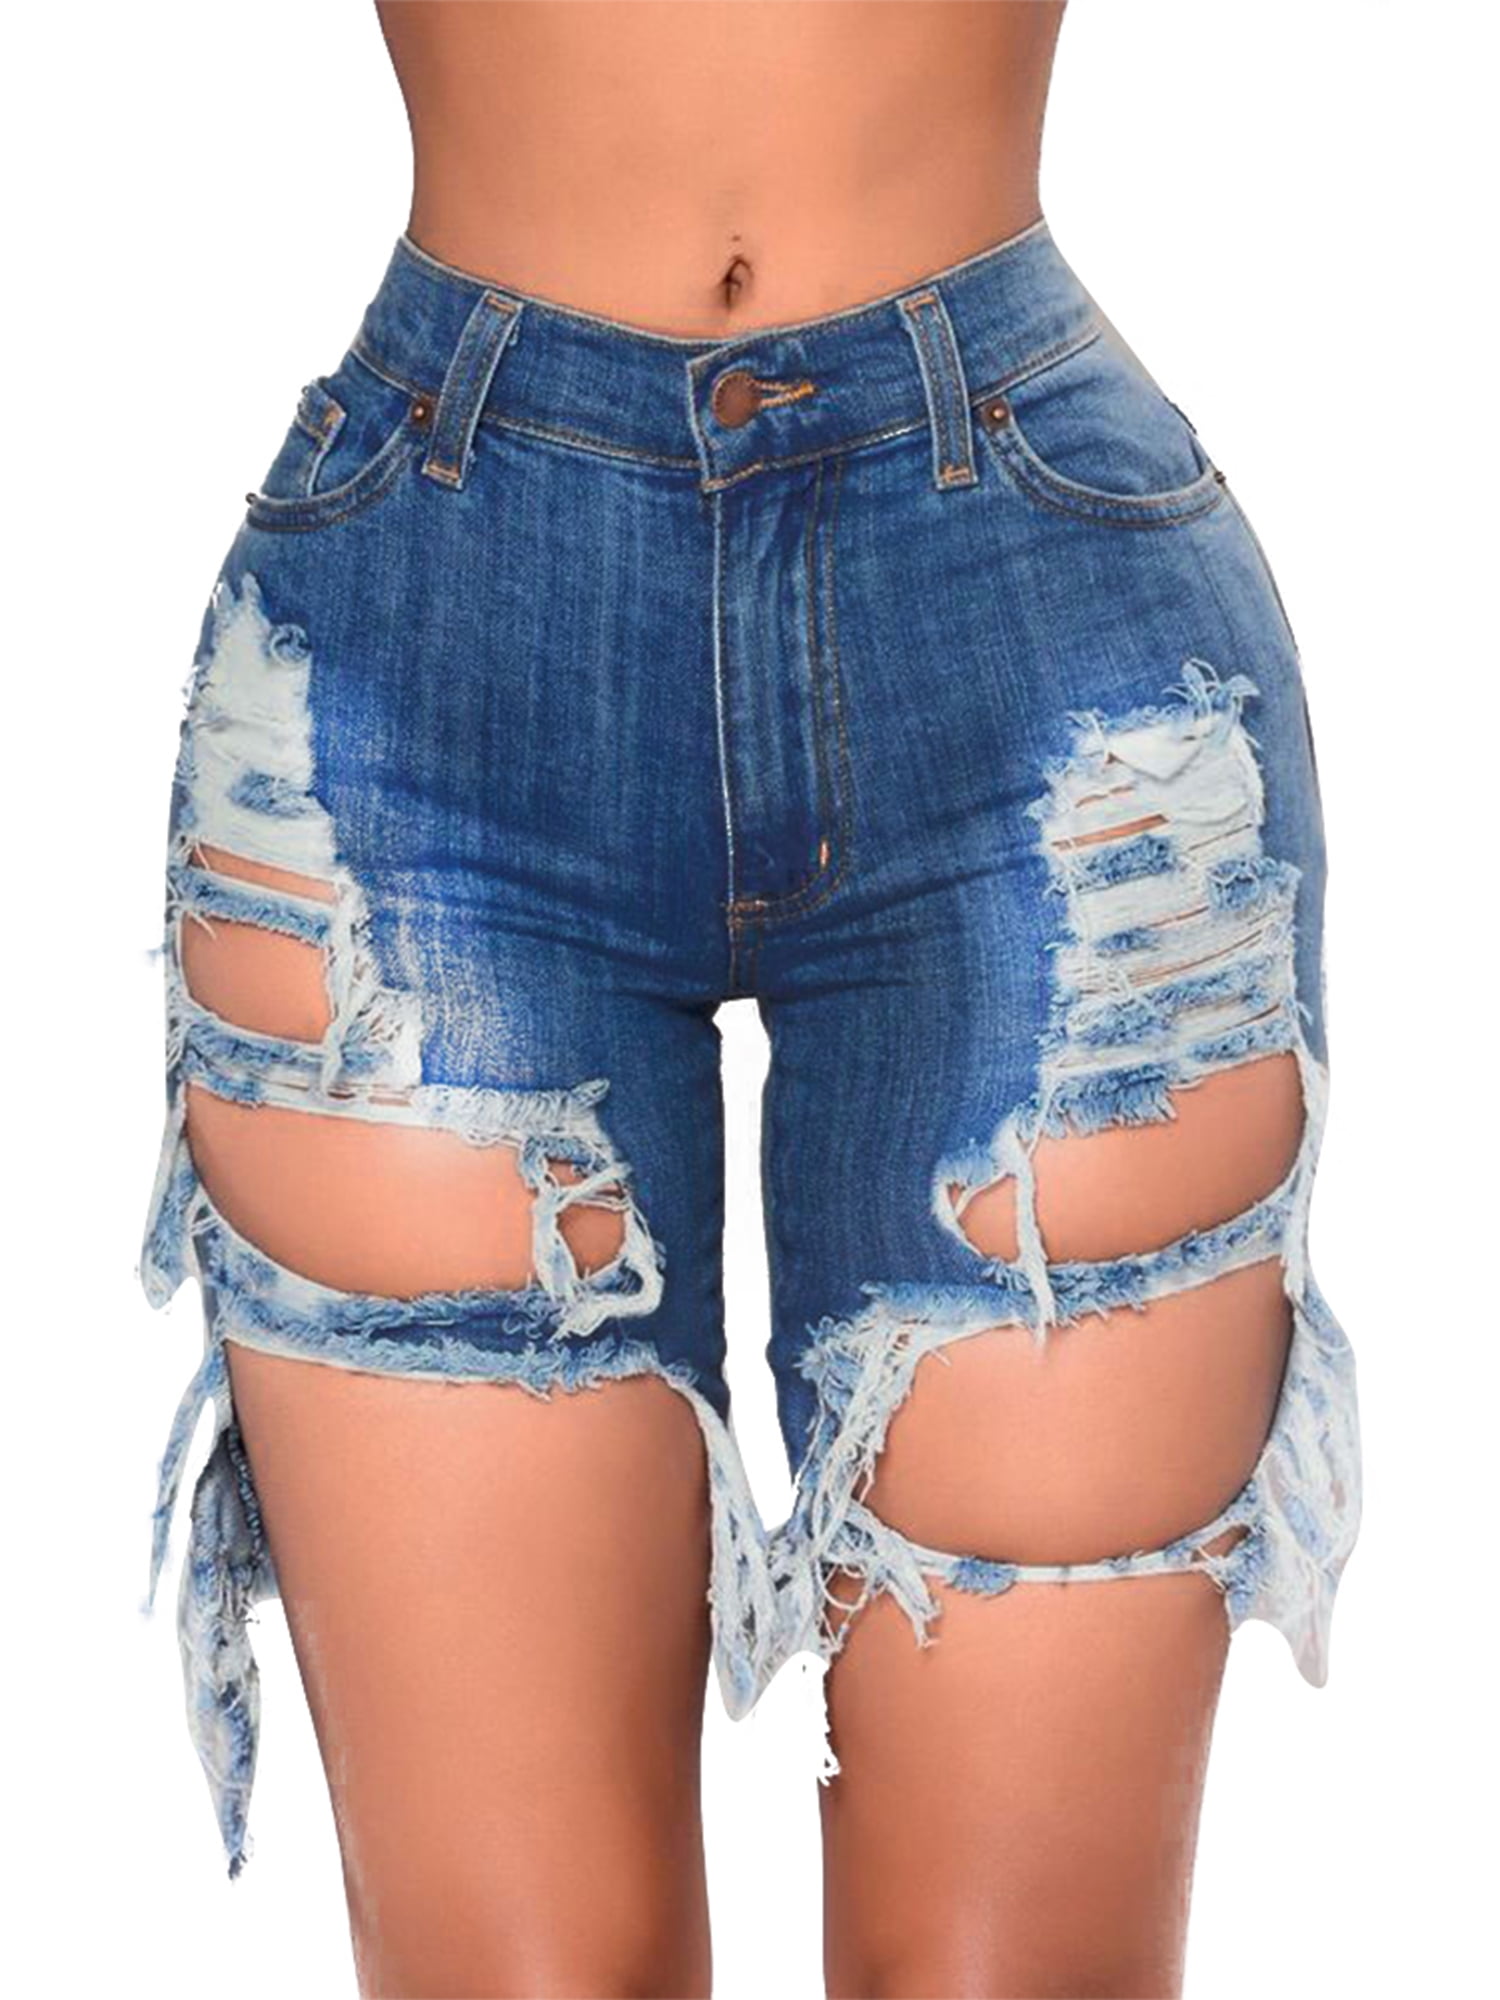 Women's High Waist Ripped Hole Denim Shorts Knee Length Stretchy Bermuda Short  Jeans Summer Distressed Jeans Shorts (Dark Blue,Small) at Amazon Women's  Clothing store